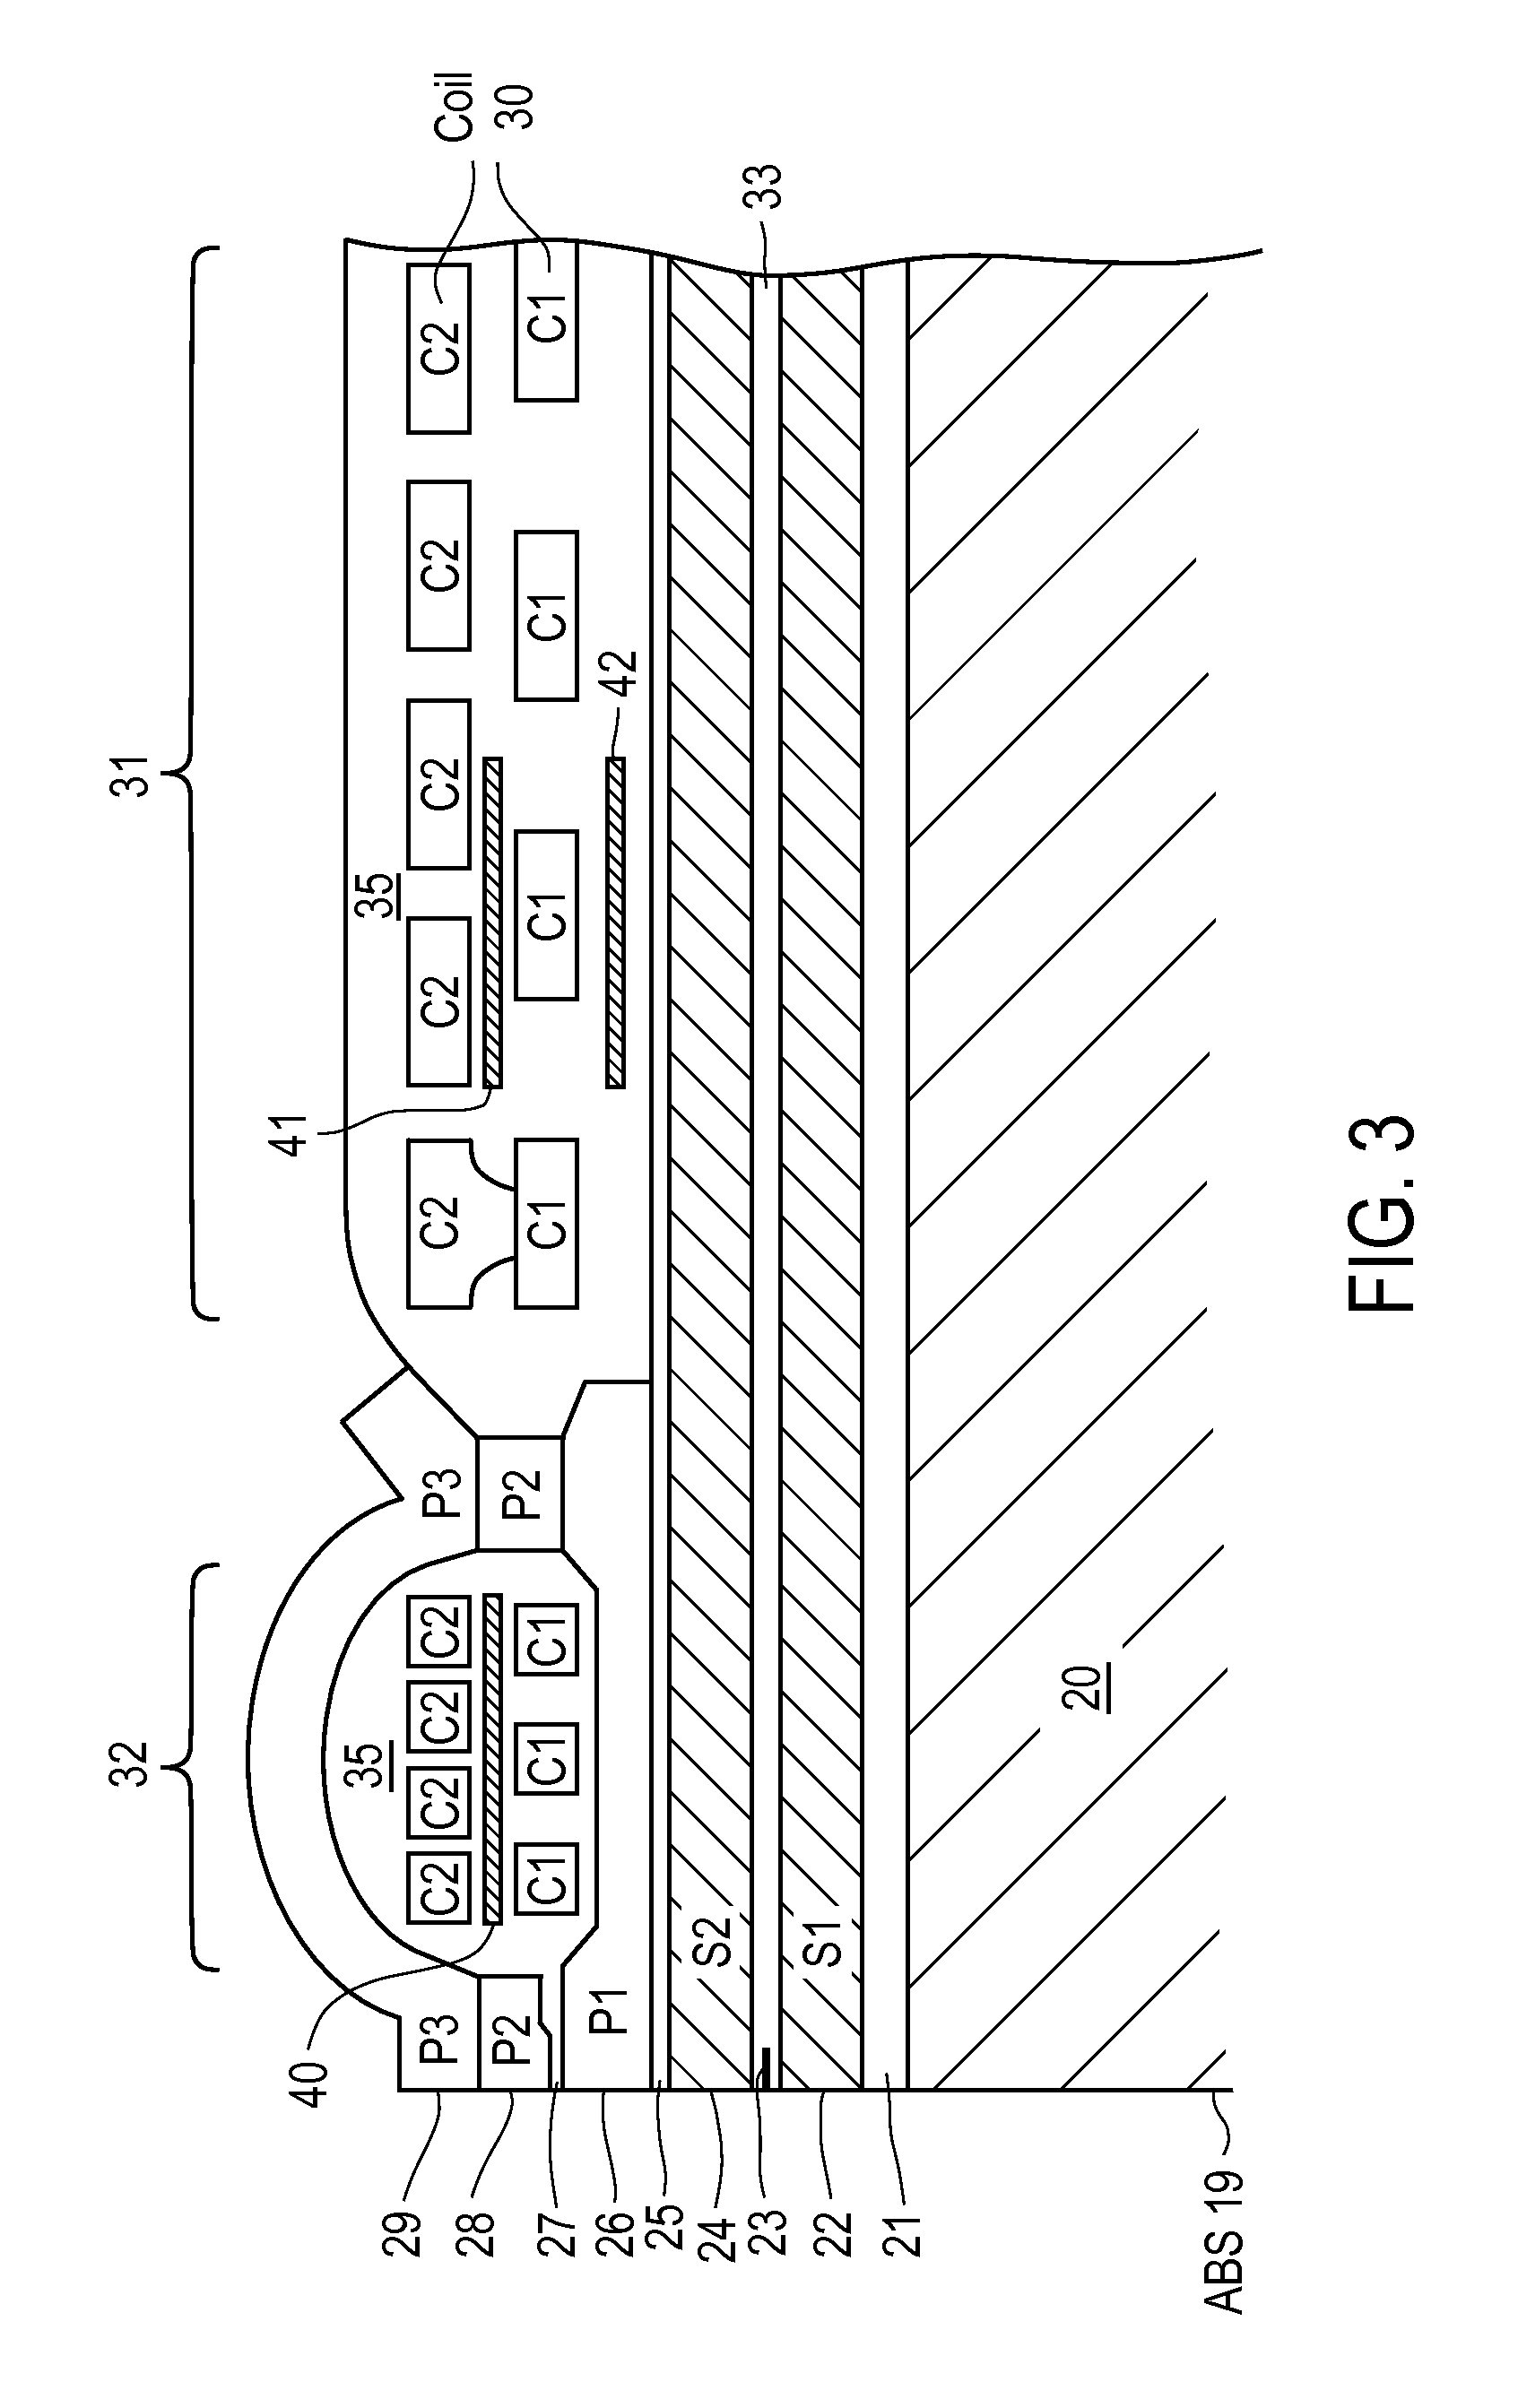 Magnetic recording head with resistive heating element located near the write coil